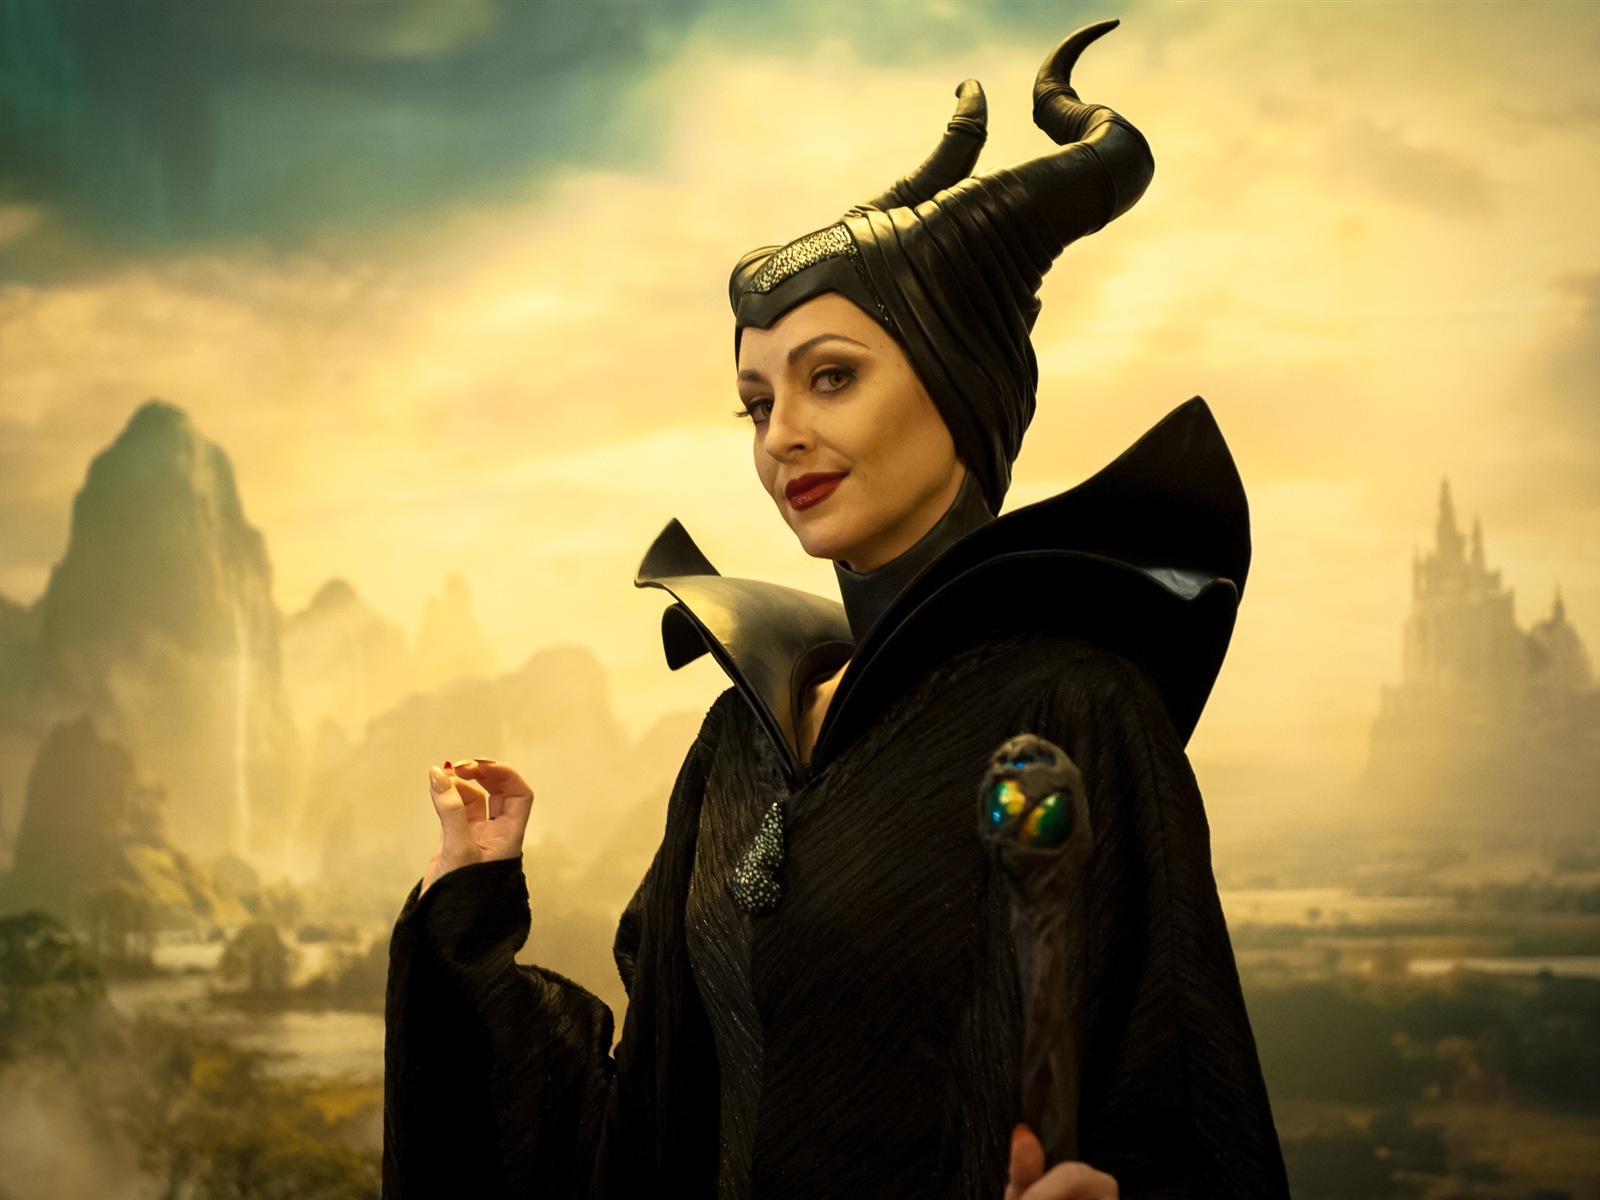 Maleficent 2014 HD movie wallpapers #11 - 1600x1200